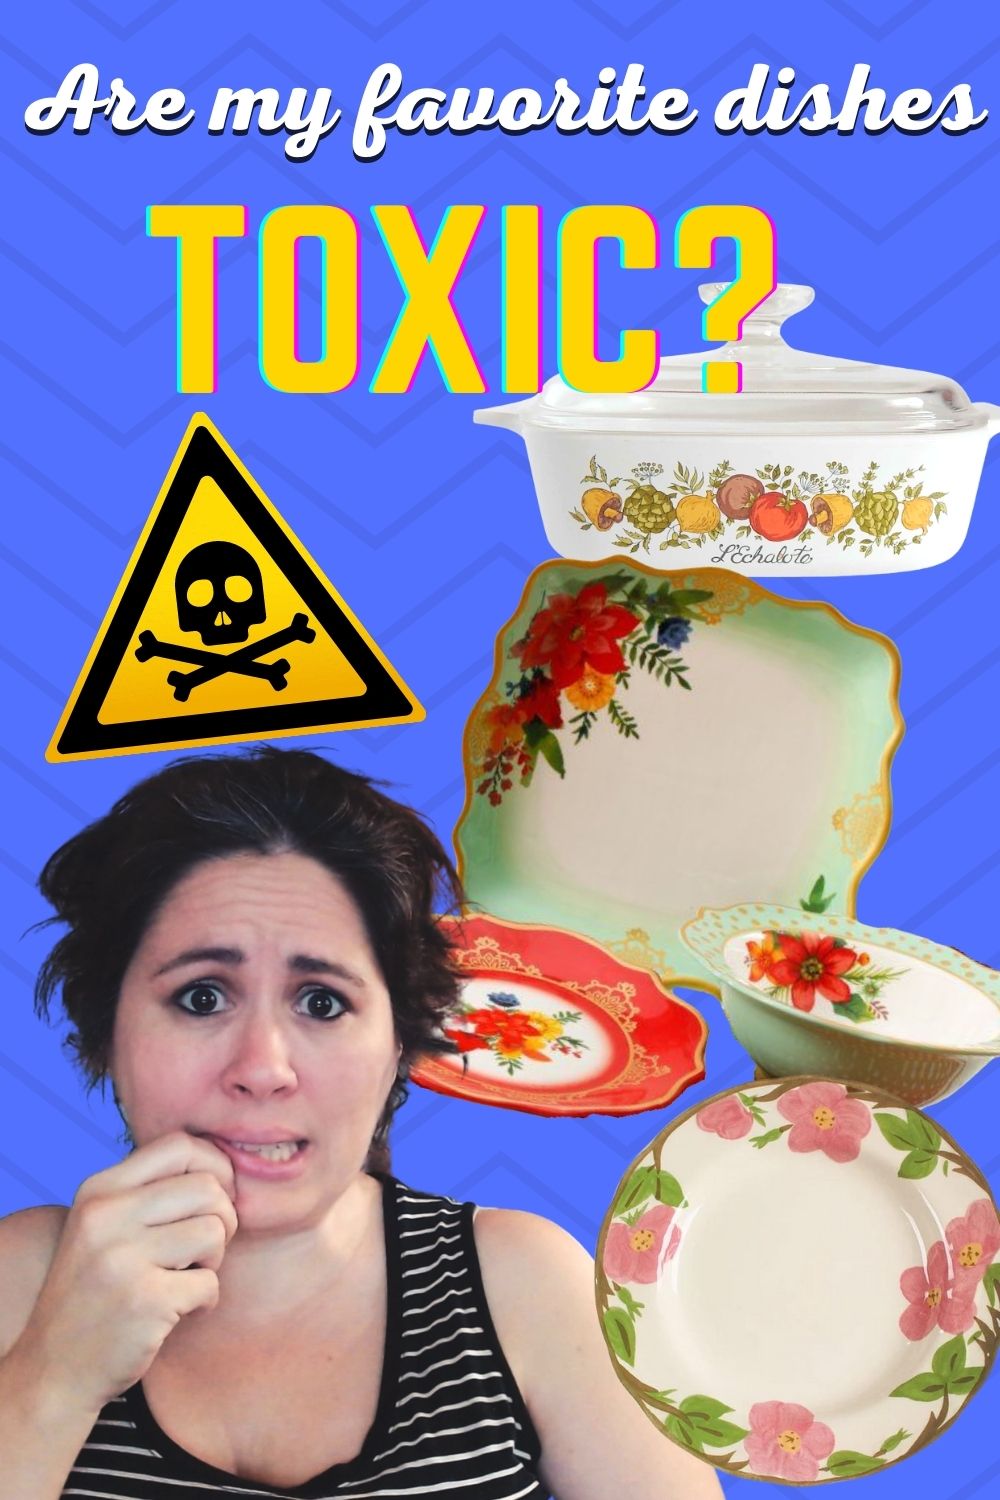 Are my favorite dishes toxic? I hope not! I’m doing my homework!